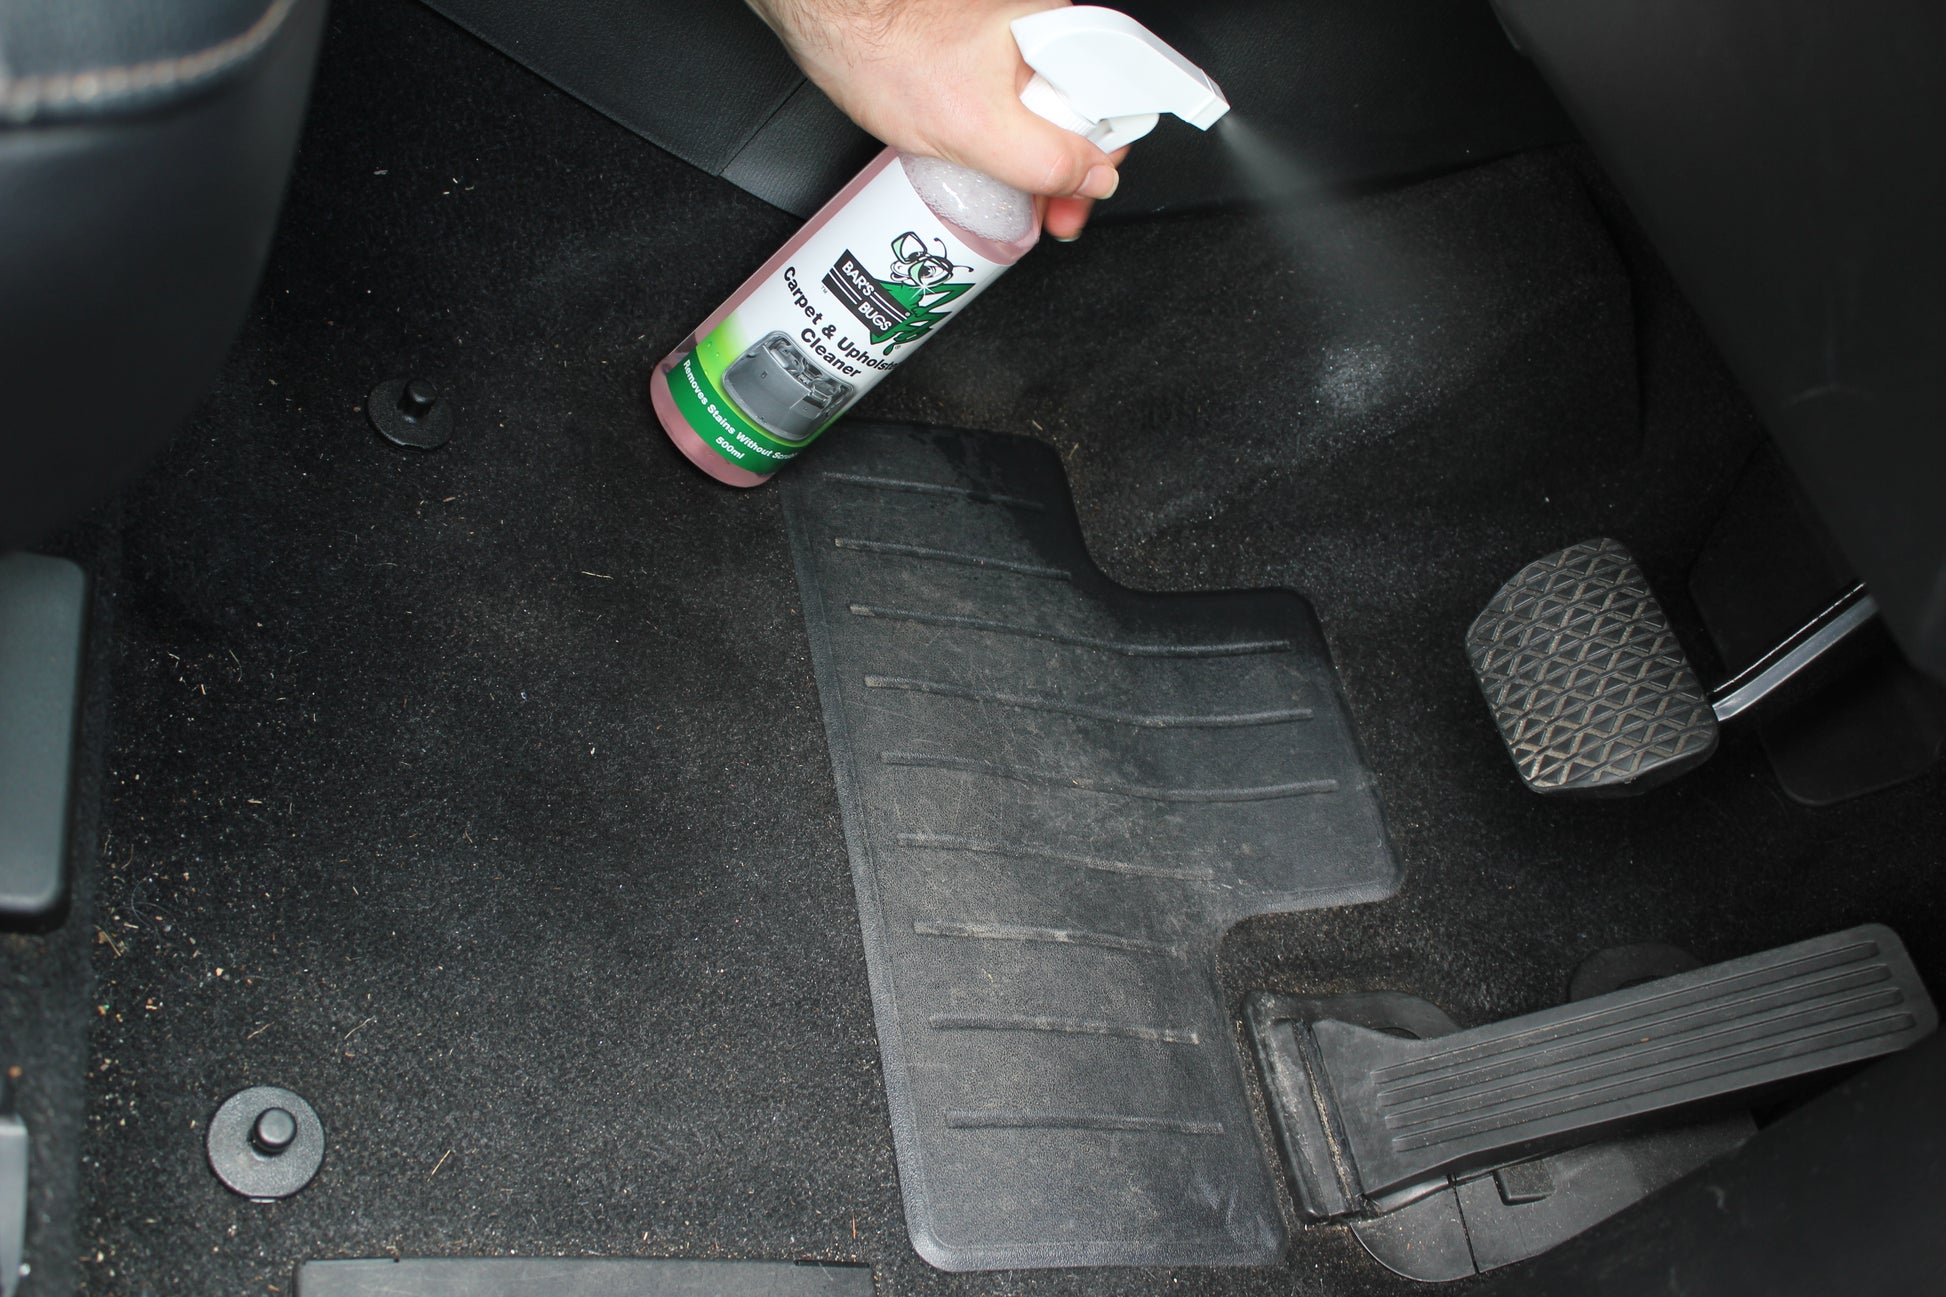 Carpet and Upholstery Cleaner Bar's Bugs Spray